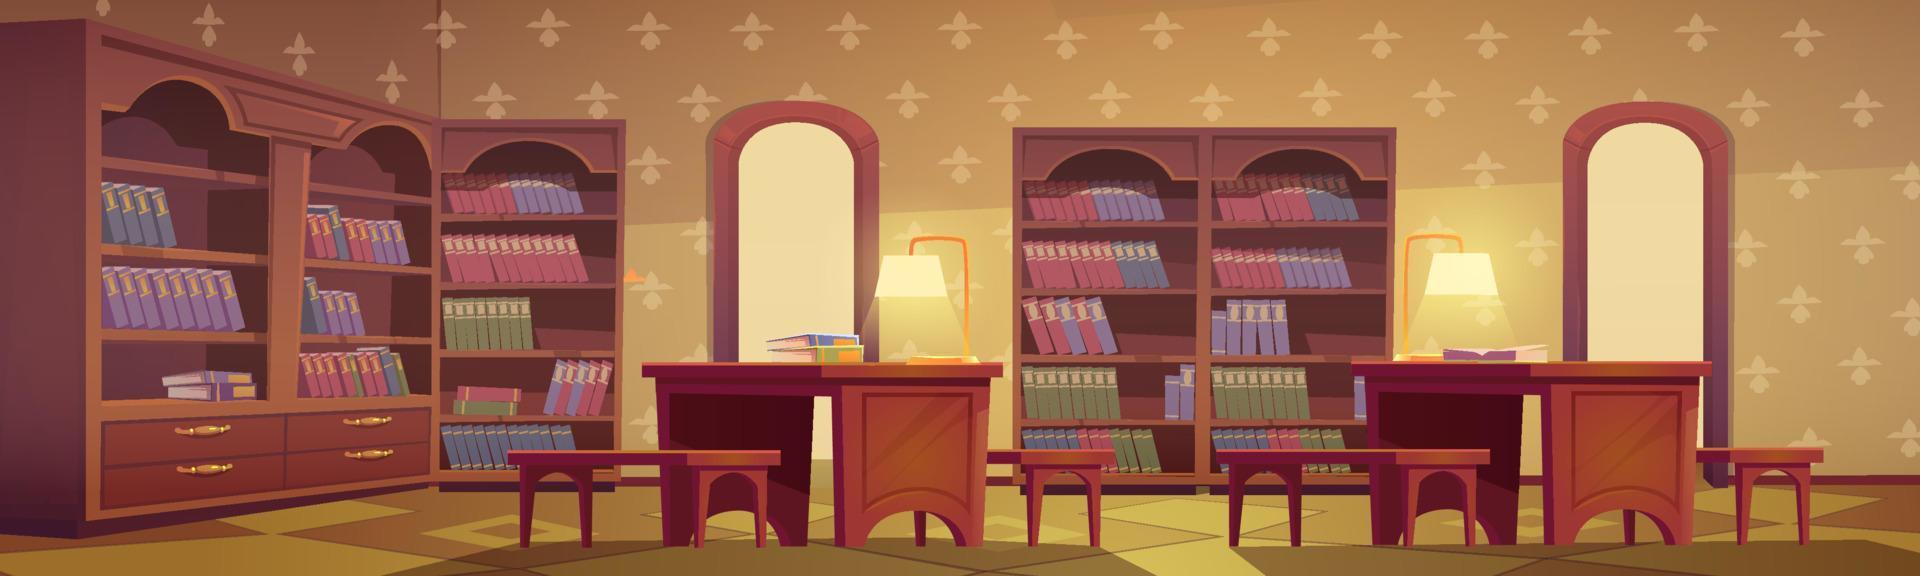 Library interior empty room for books reading vector